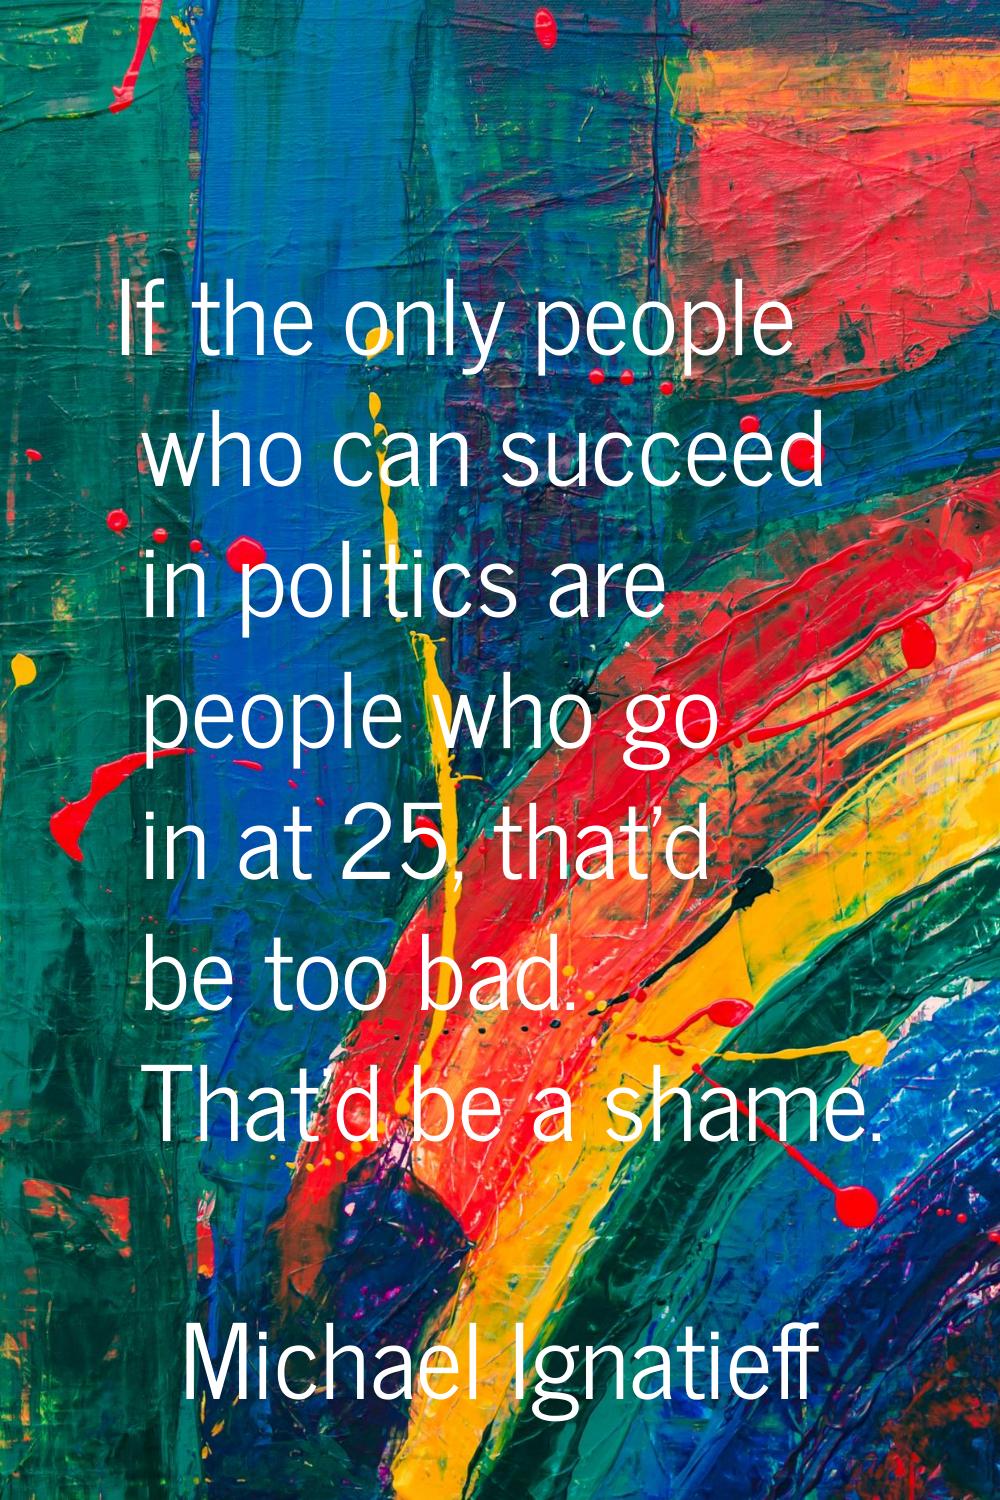 If the only people who can succeed in politics are people who go in at 25, that'd be too bad. That'